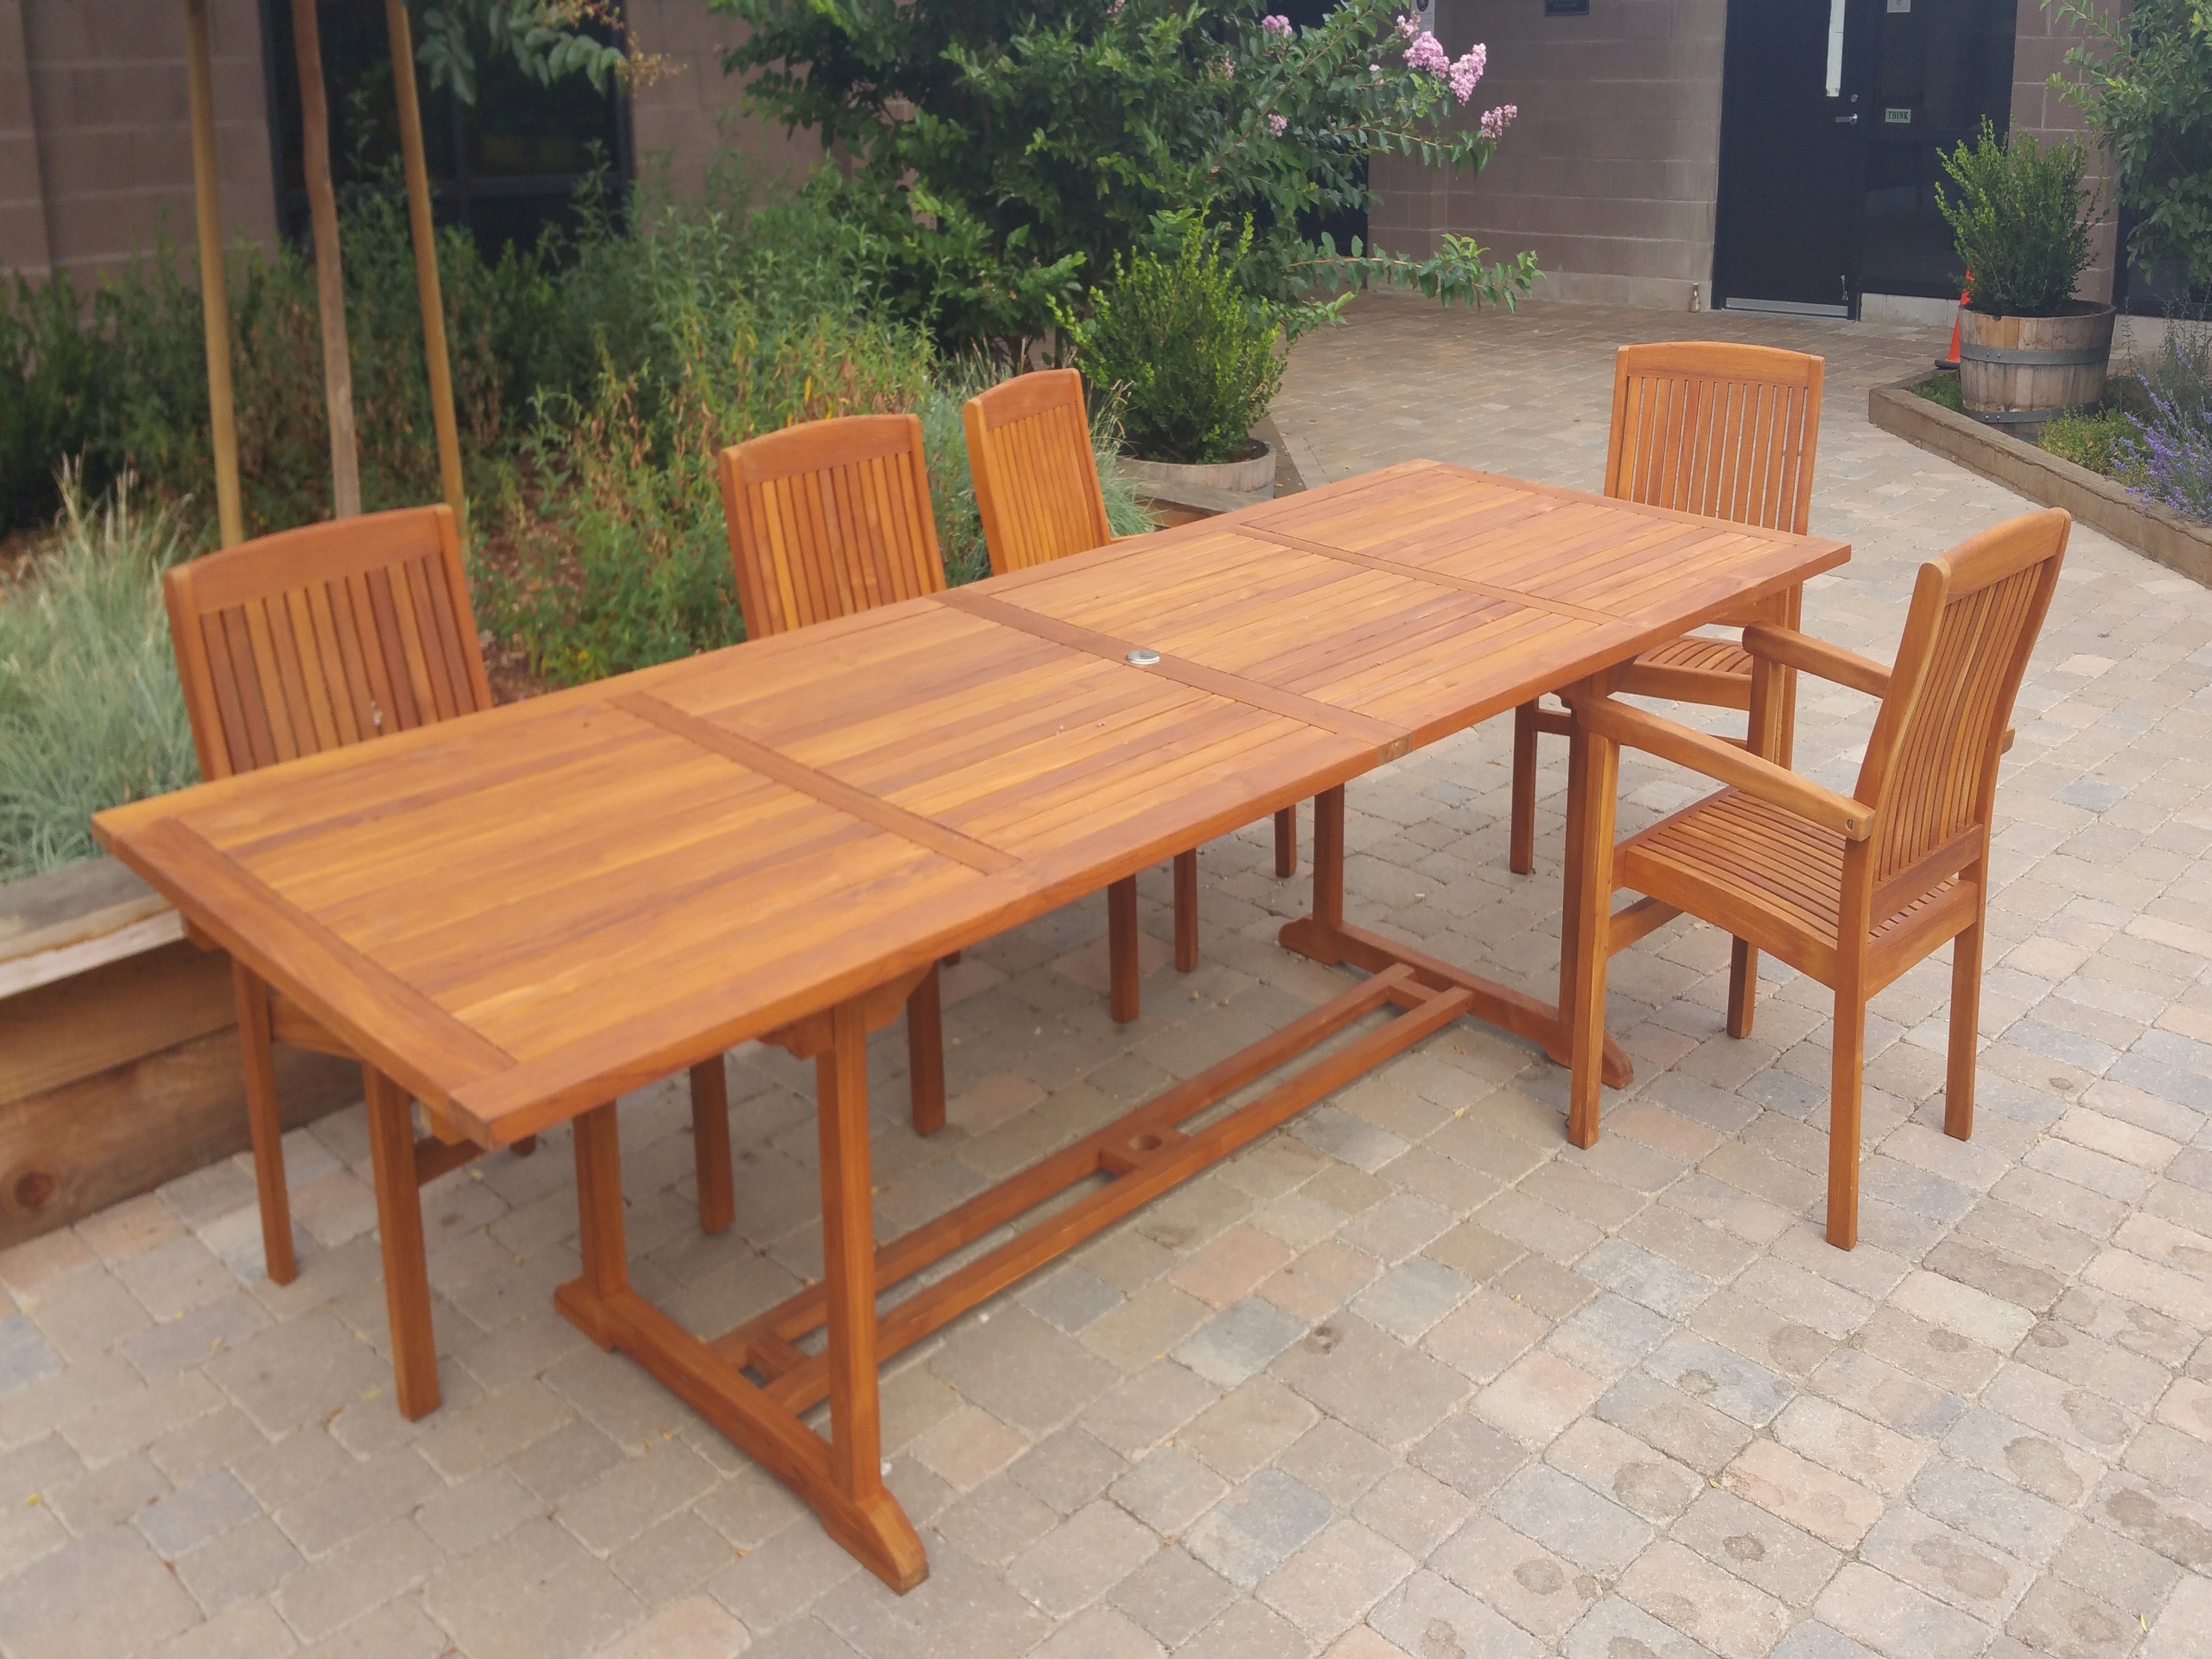 Kitchen Dining Room Chairs To Match Teak Table